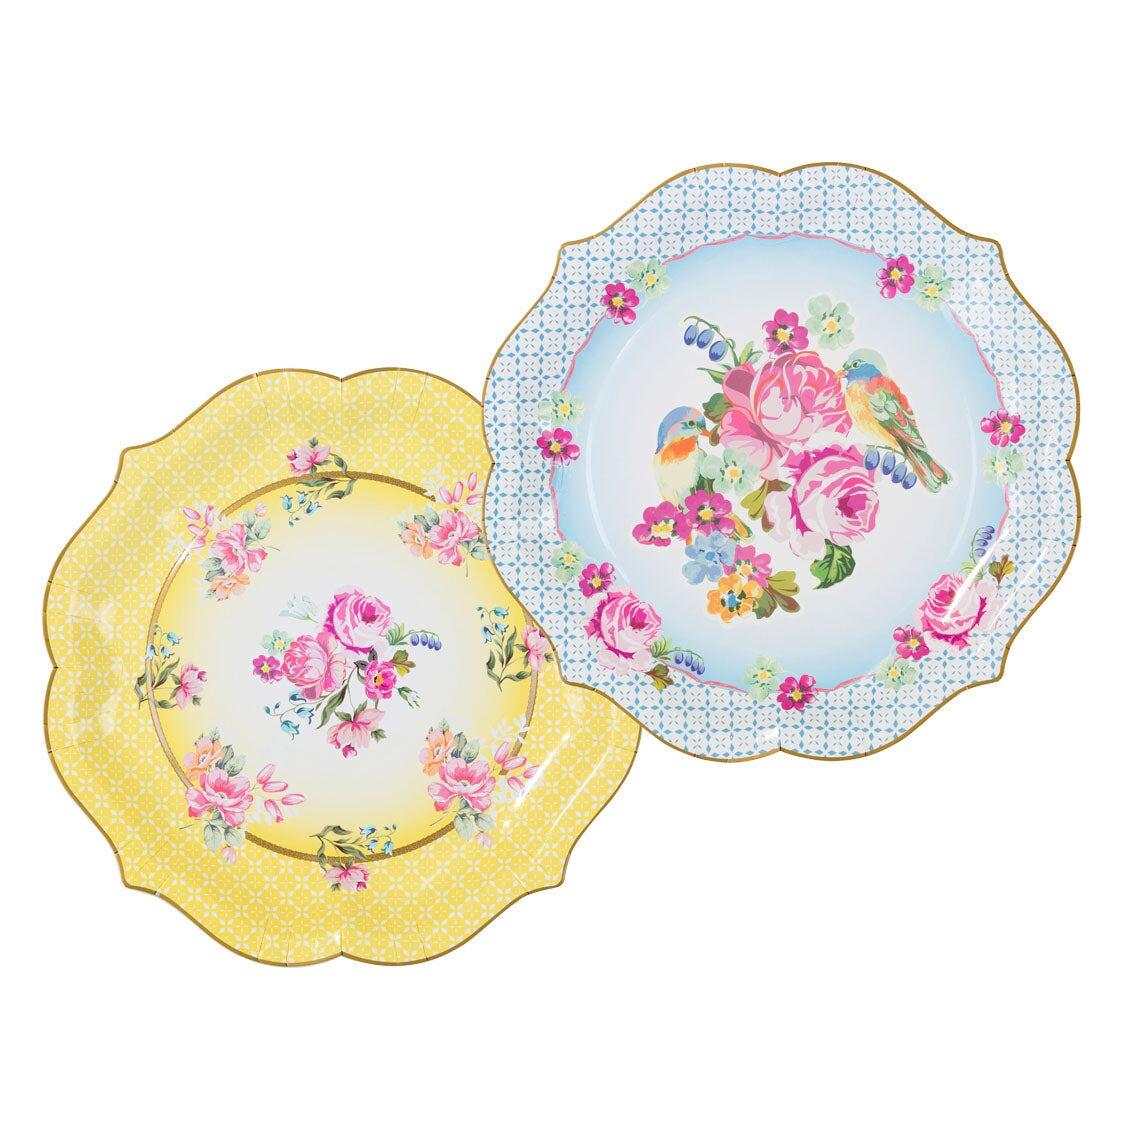 Disposable truly scrumptious serving party plates  yellow and blue